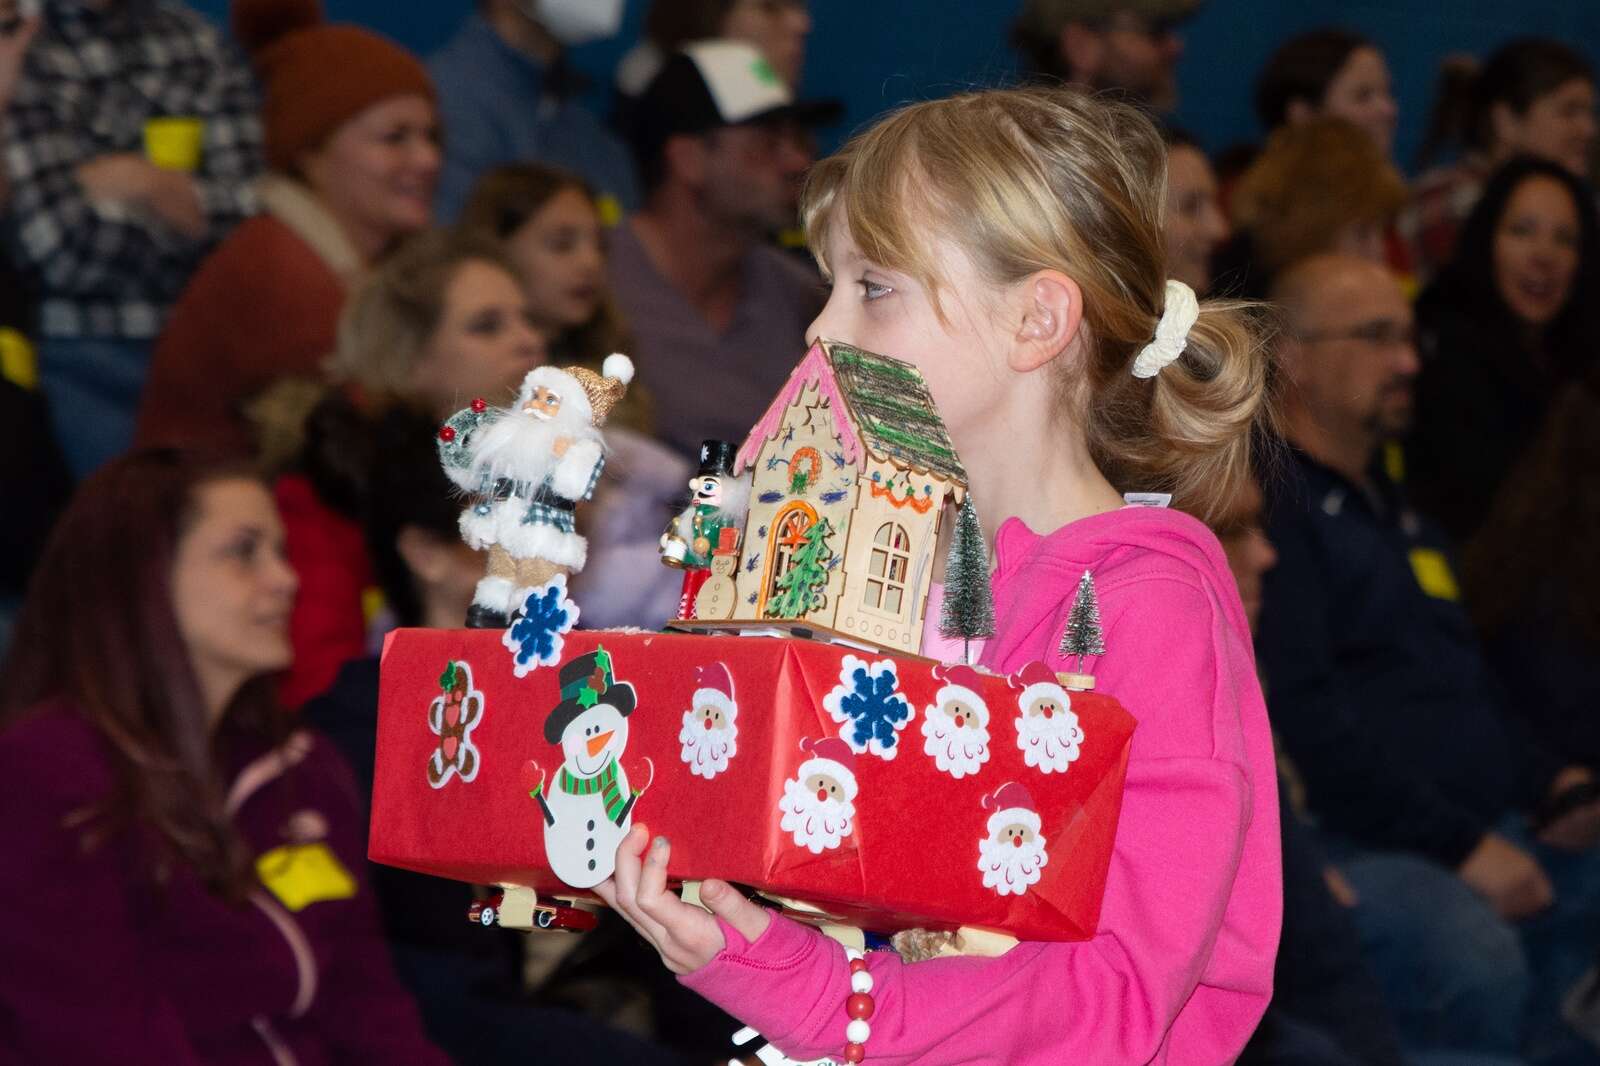 Student at Knoch Primary School holds up her Christmas themed float